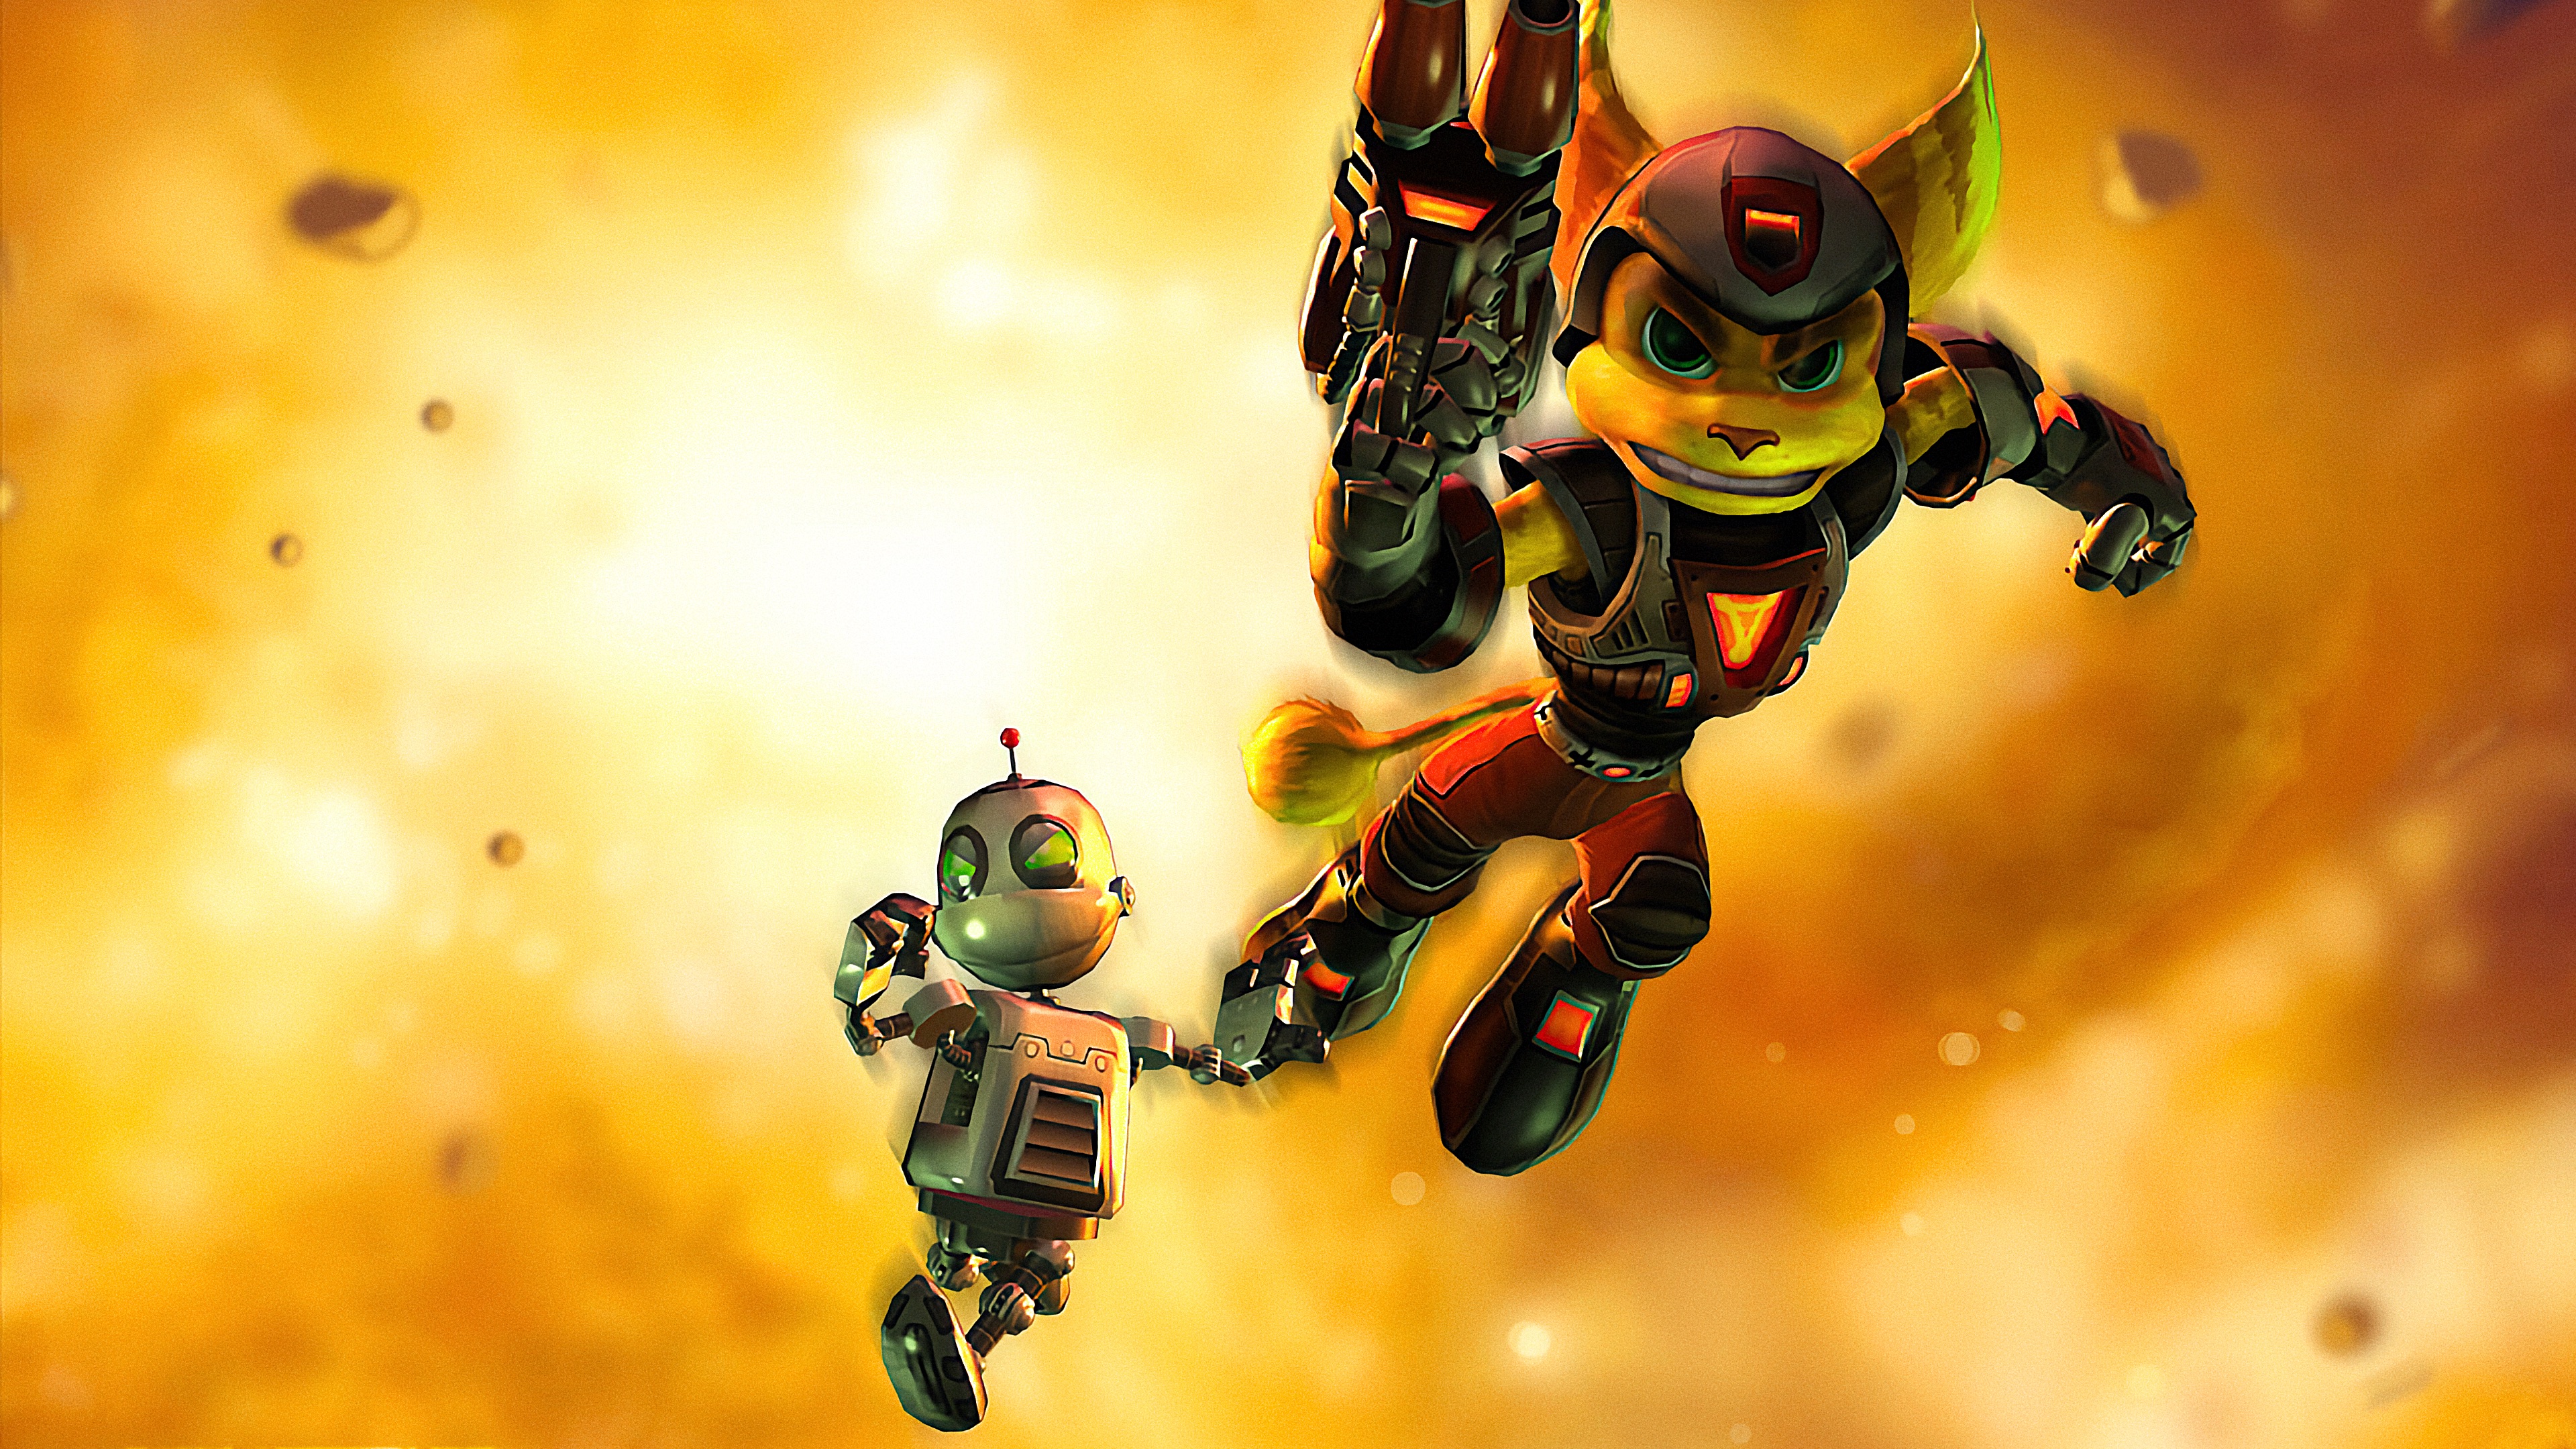 General 3840x2160 Ratchet & Clank PlayStation 2 digital art video games minimalism Video Game Heroes gun simple background angry video game characters CGI